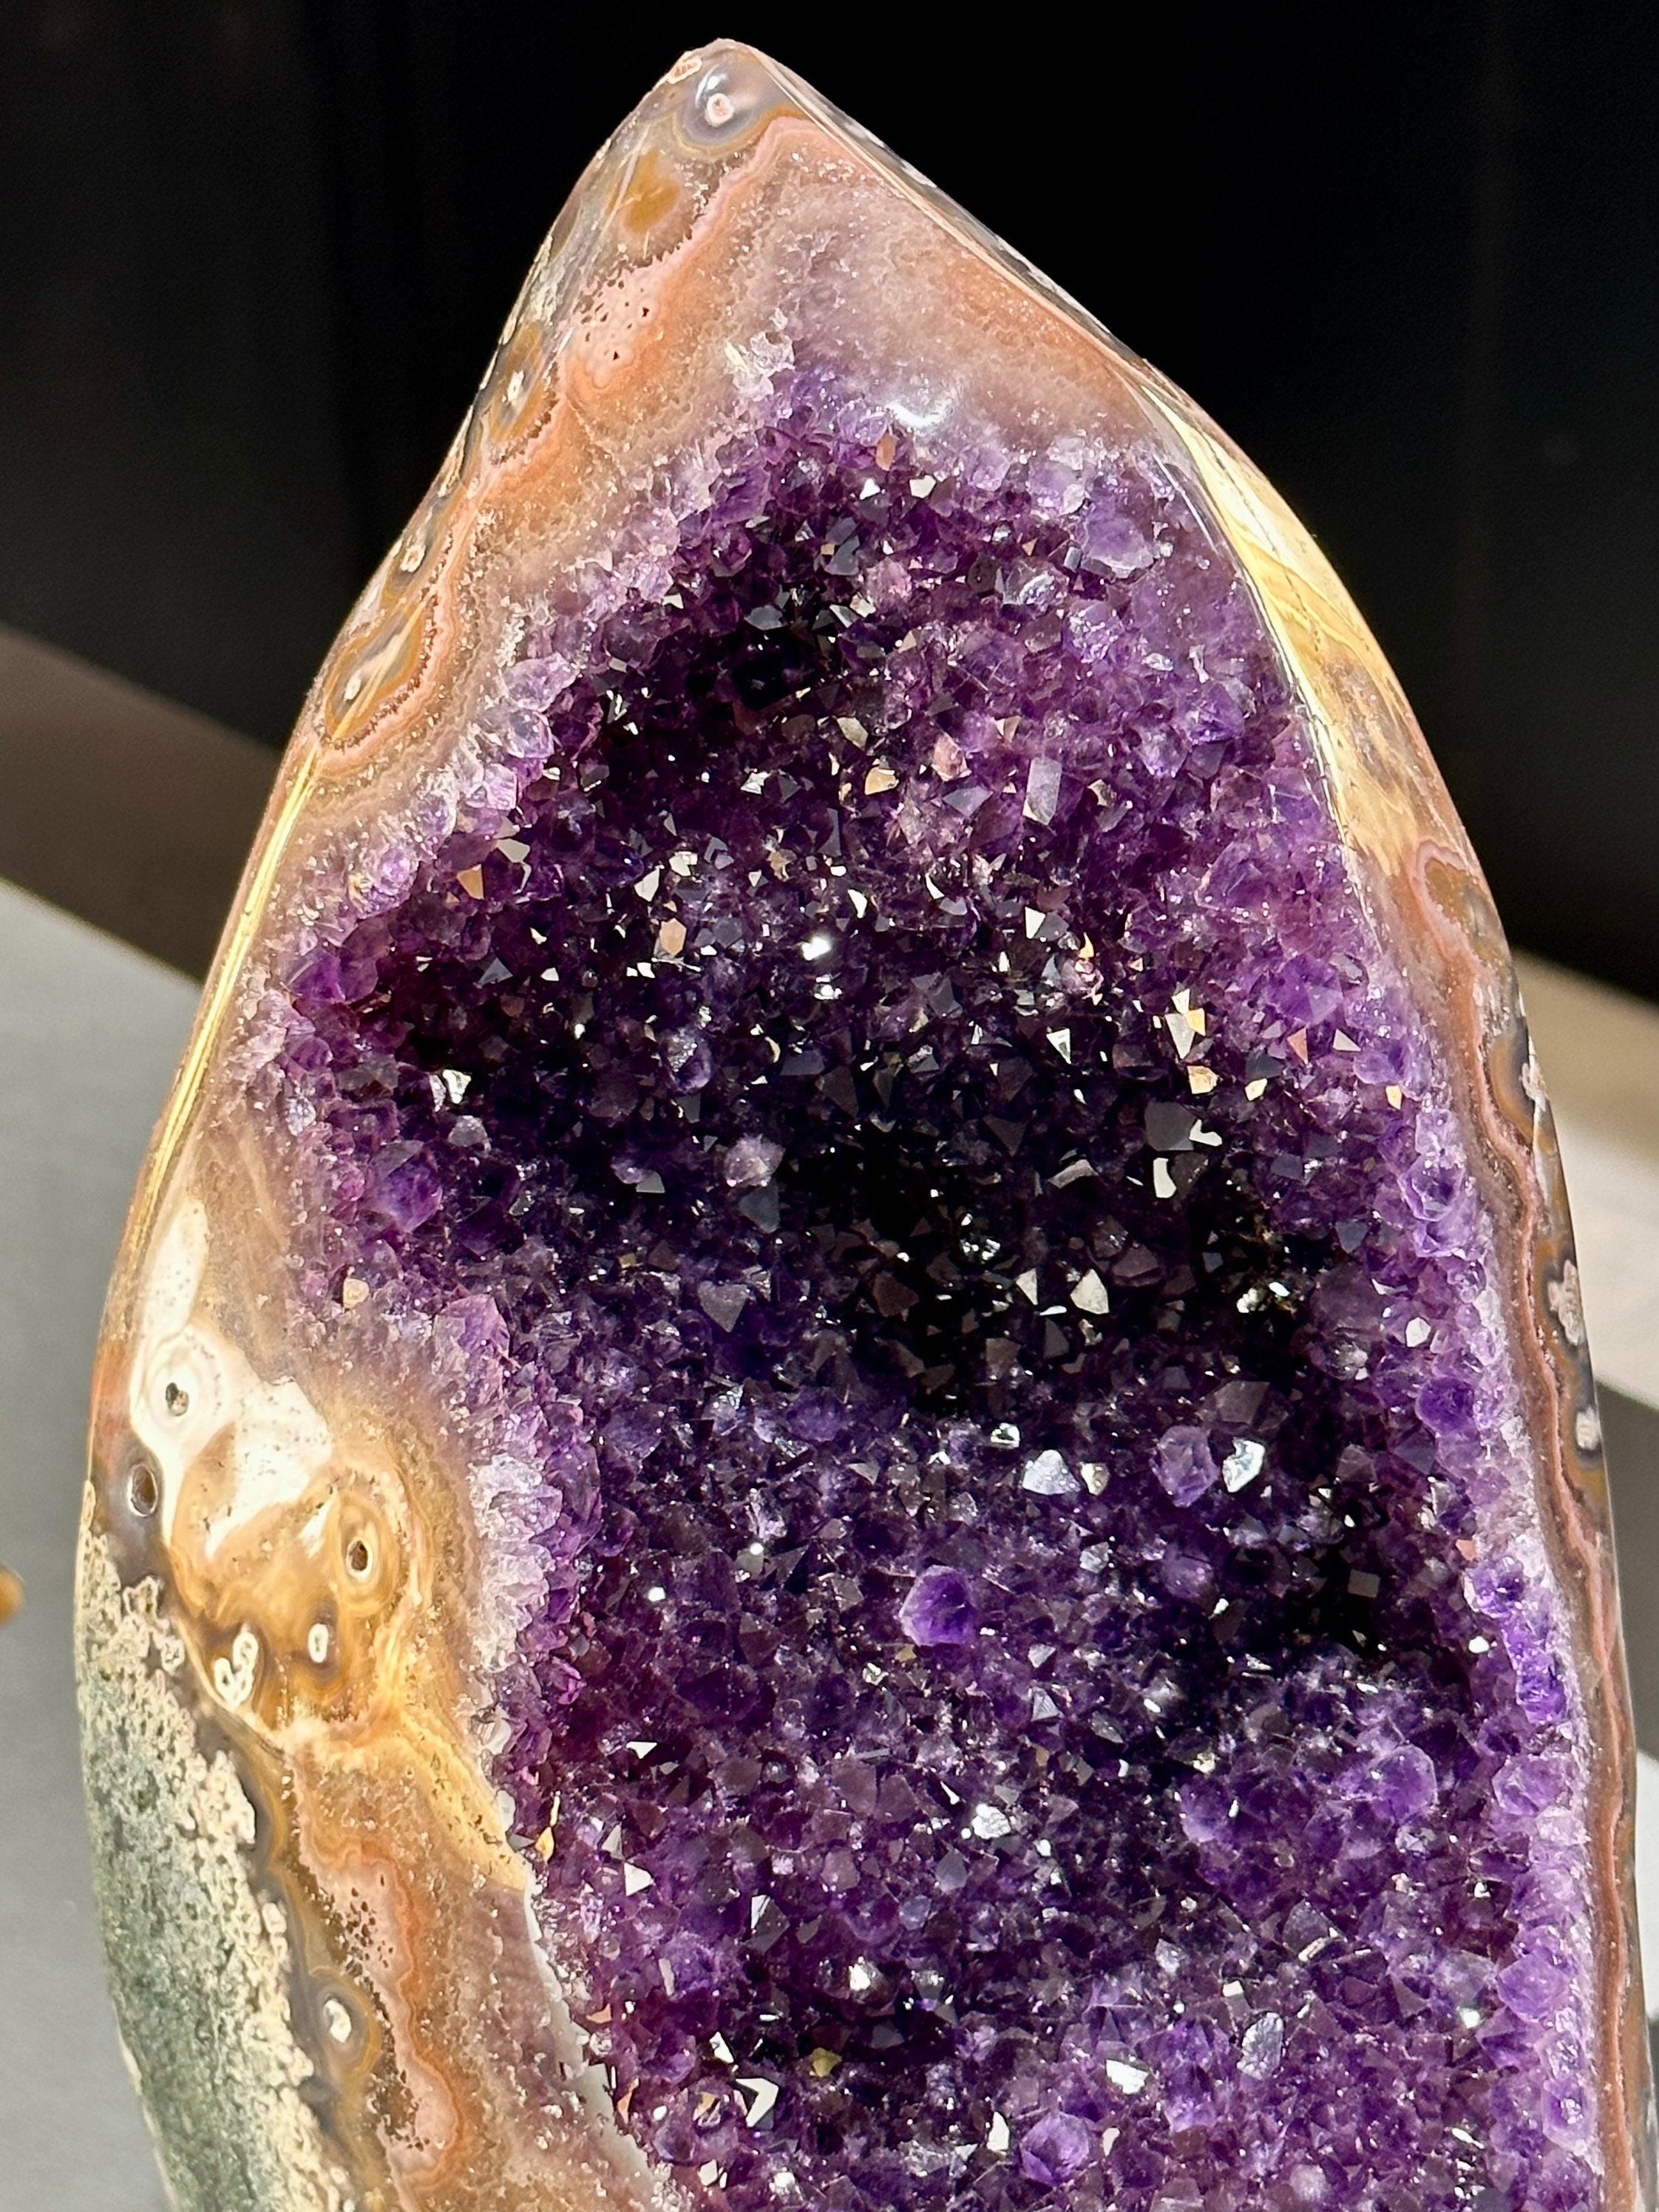 Mystical Amethyst Geode - Decorative Crystals for Home Art - Elegant Geode Display - Natures Beauty - Decorative Amethyst Geode For Home